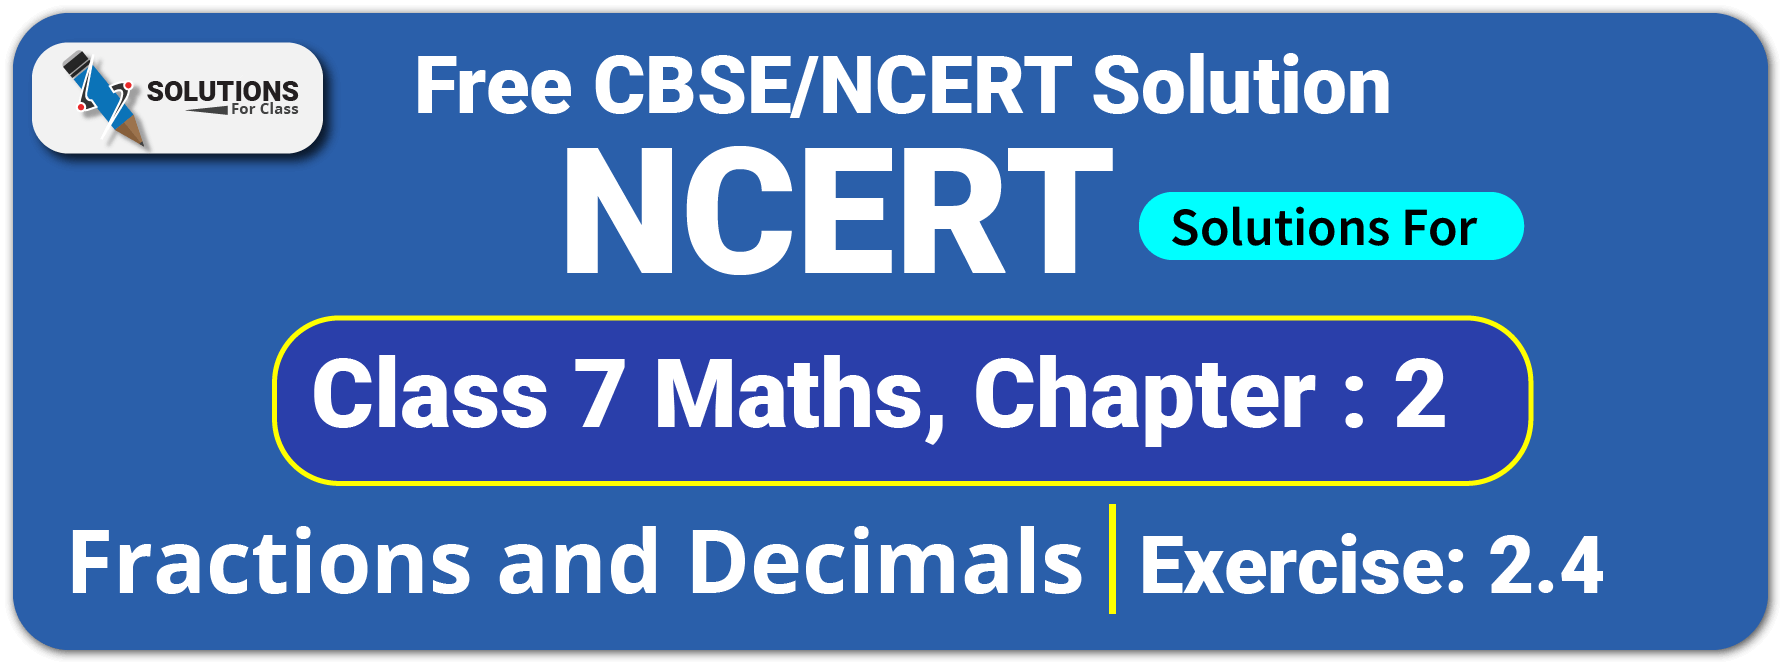 NCERT Solutions For Class 7 Chapter 2, Fractions and Decimals, Exercise 2.4